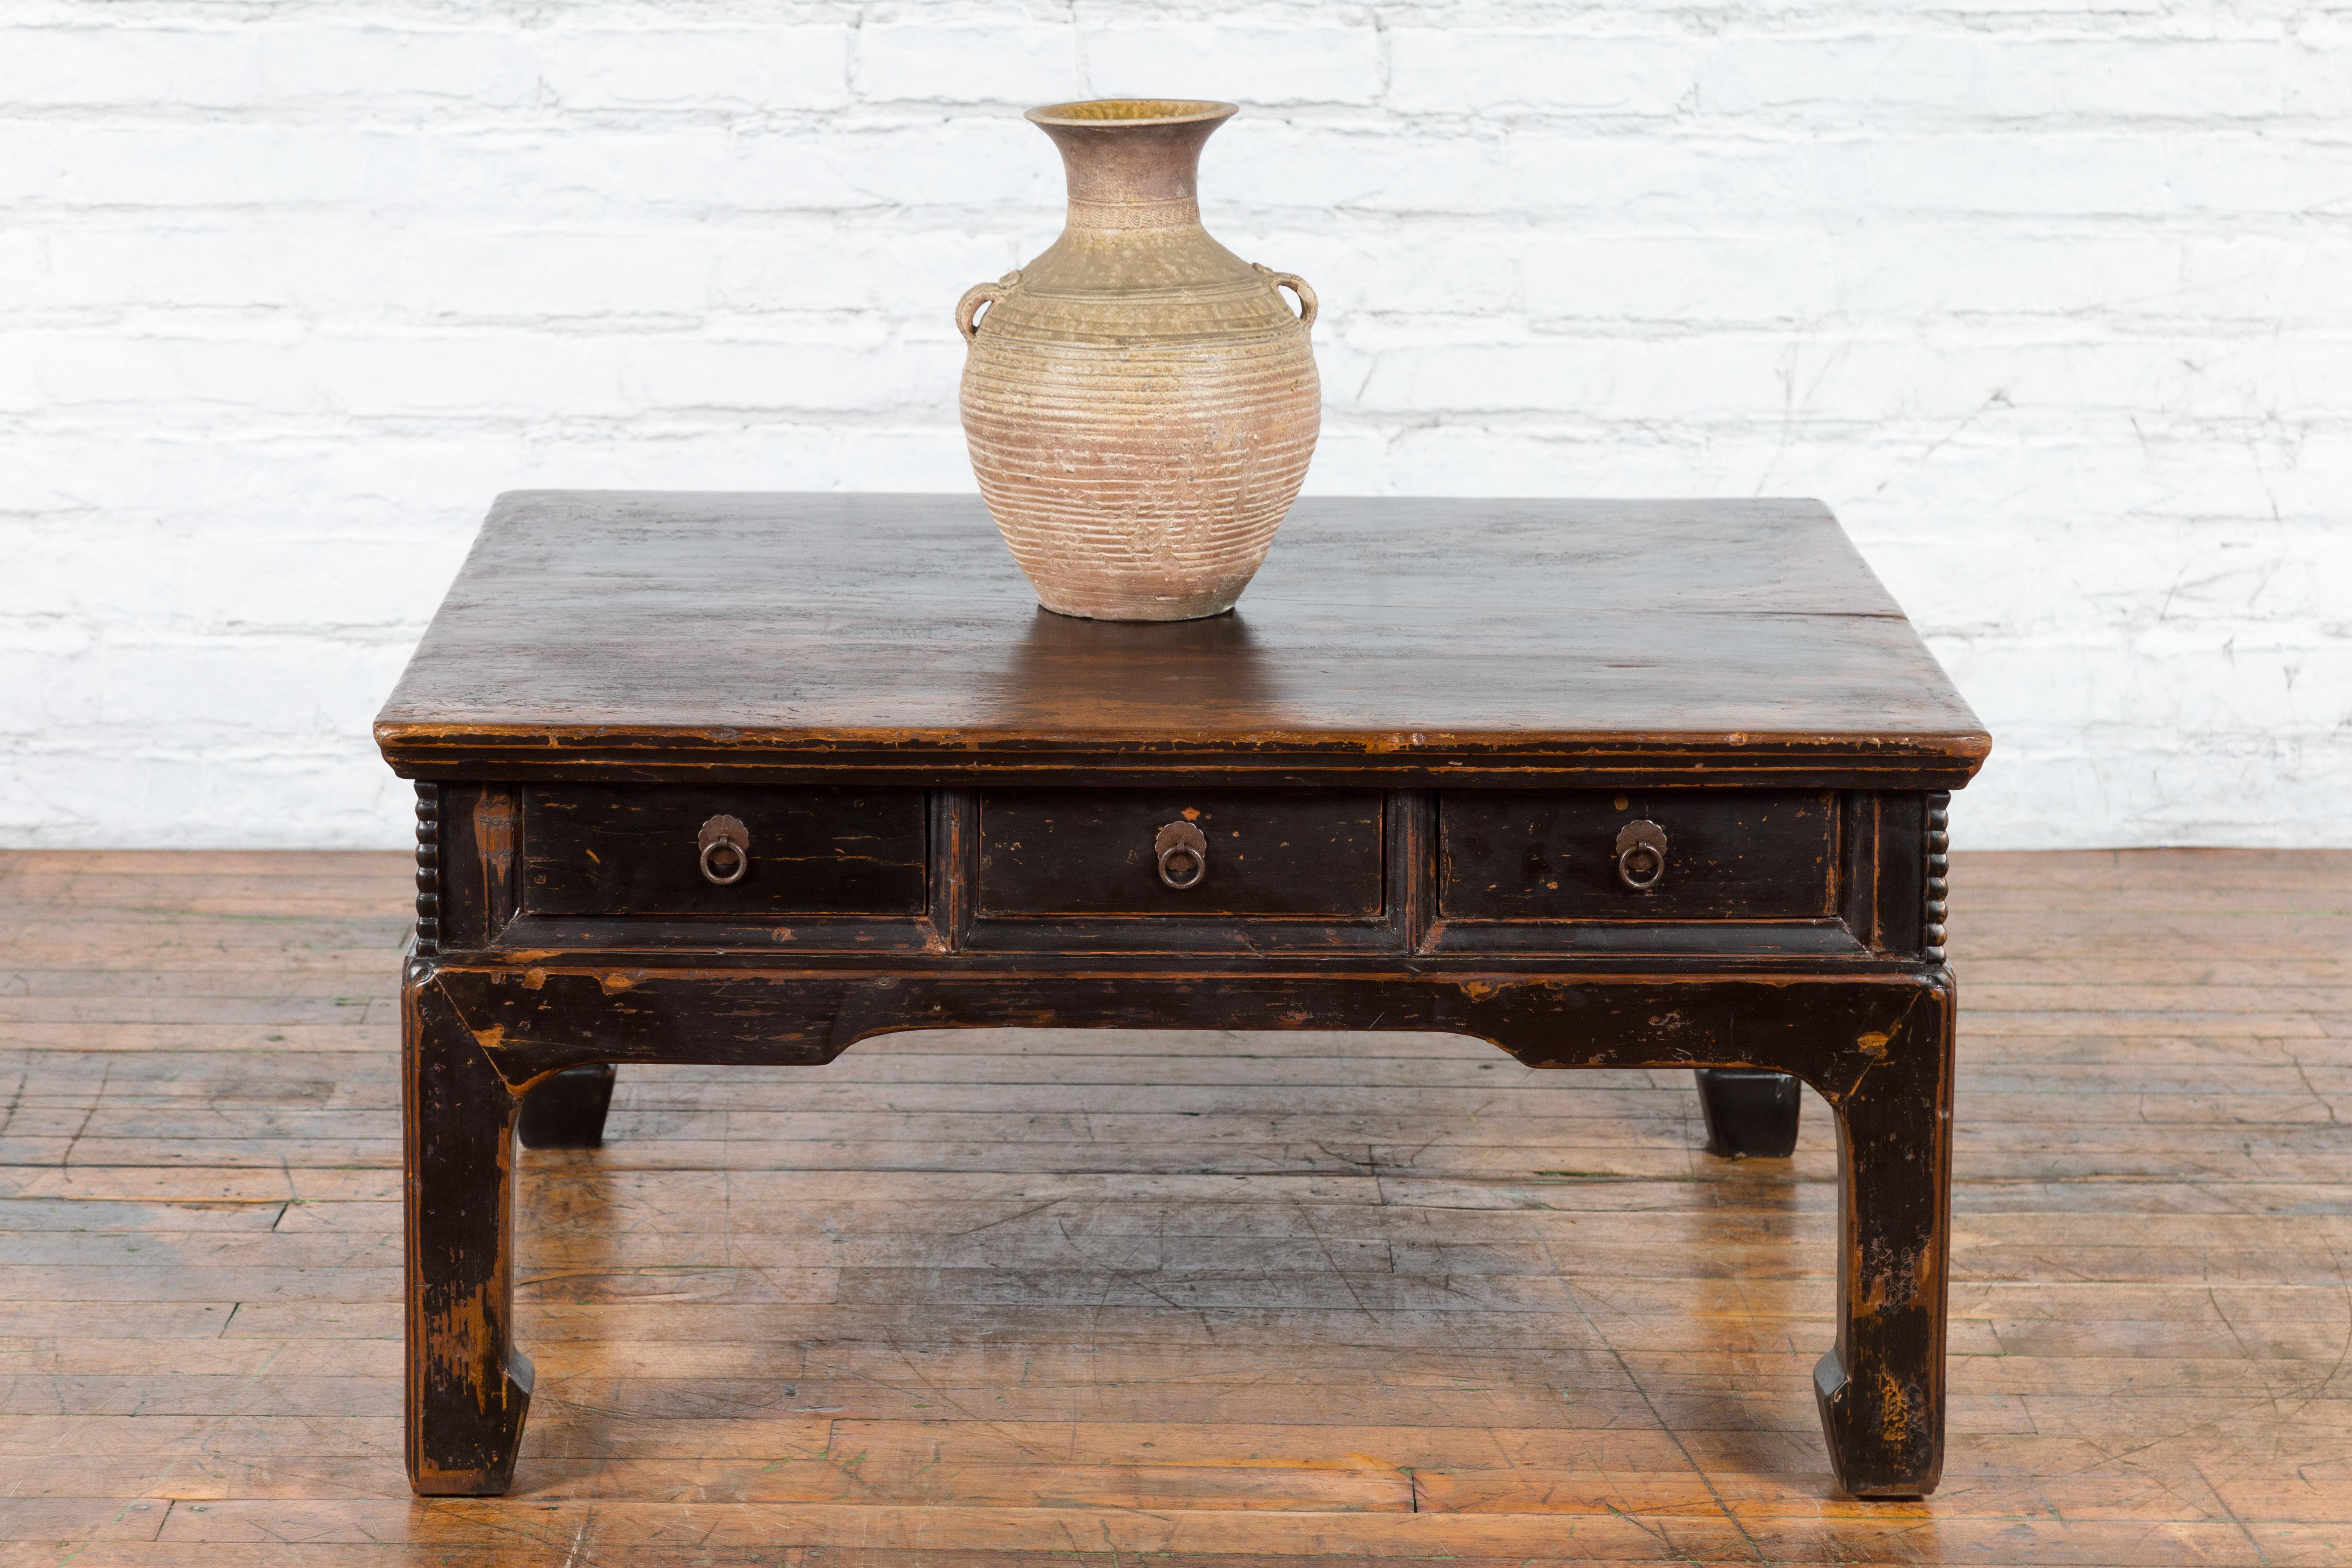 Chinese Qing Dynasty Period Brown Lacquered Coffee Table with Original Finish In Good Condition For Sale In Yonkers, NY